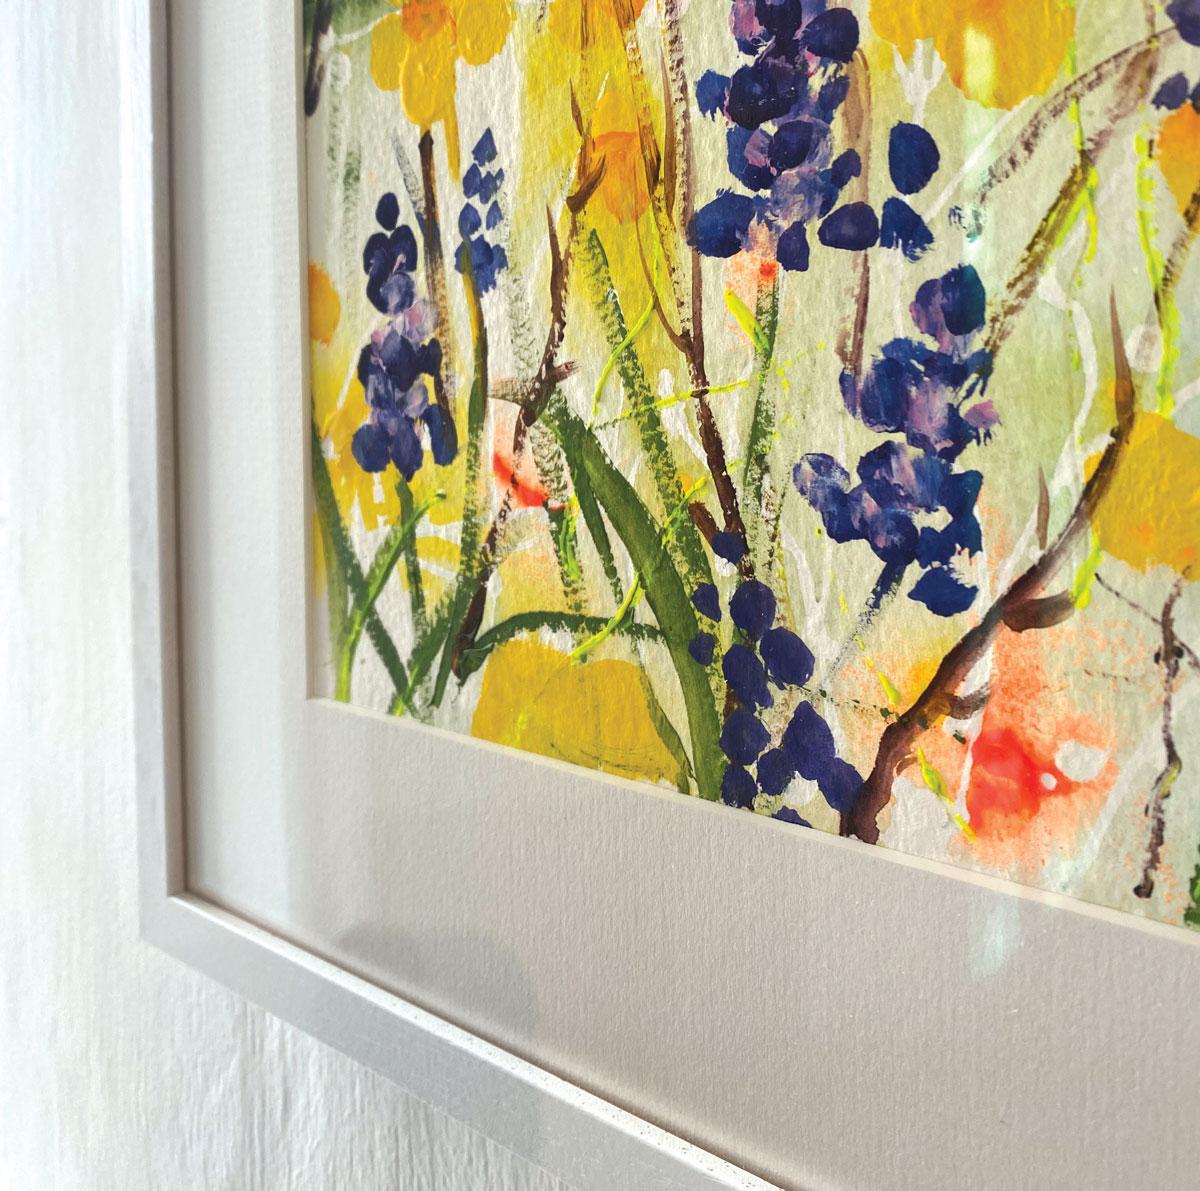 Muscari and Daffodils by Rachael Dalzell. Acrylic on paper. White wood frame 4